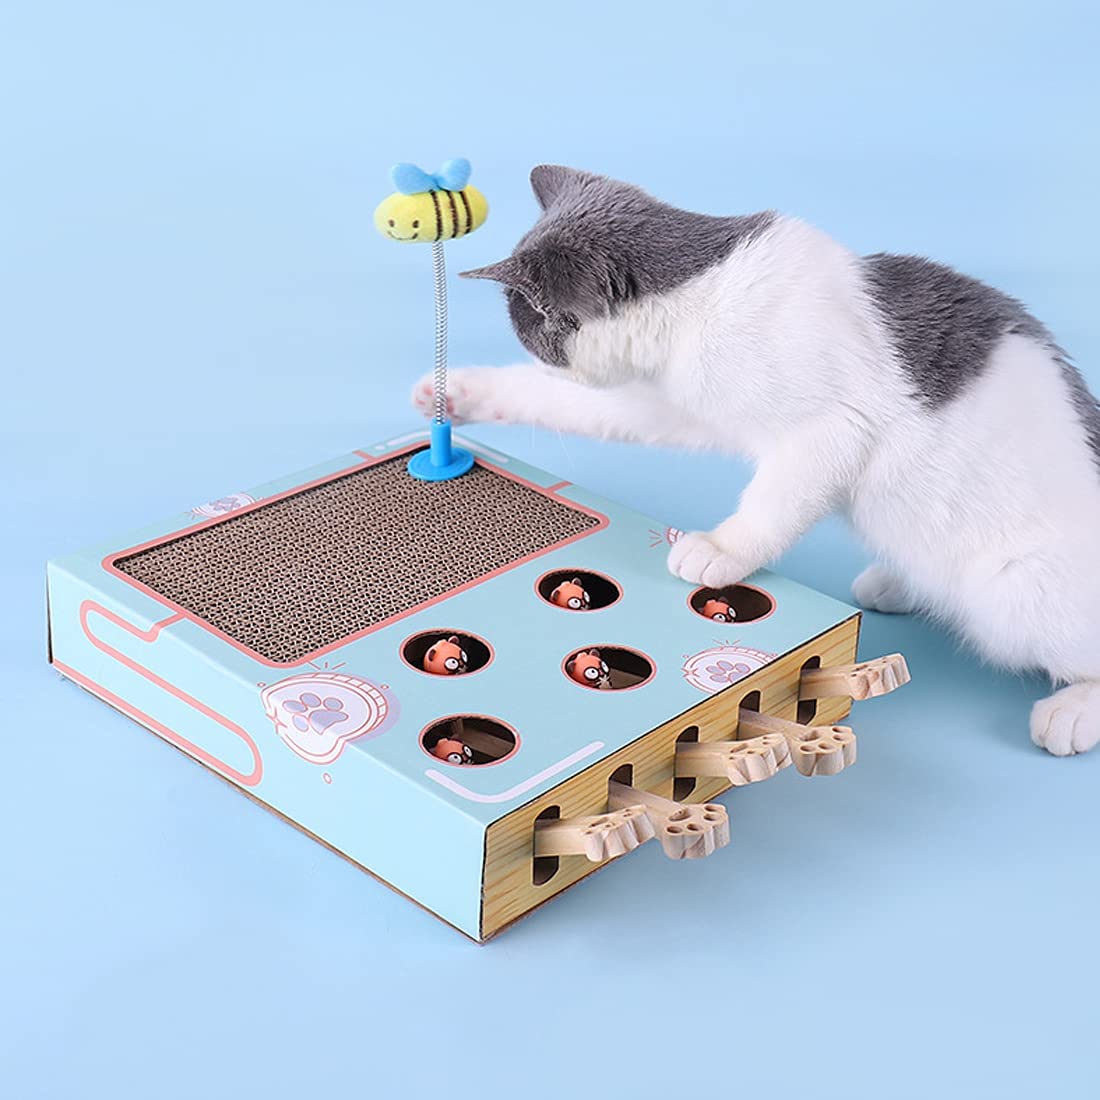 Multifunction Cat Whack A Mole Toy Boxes -Topselling